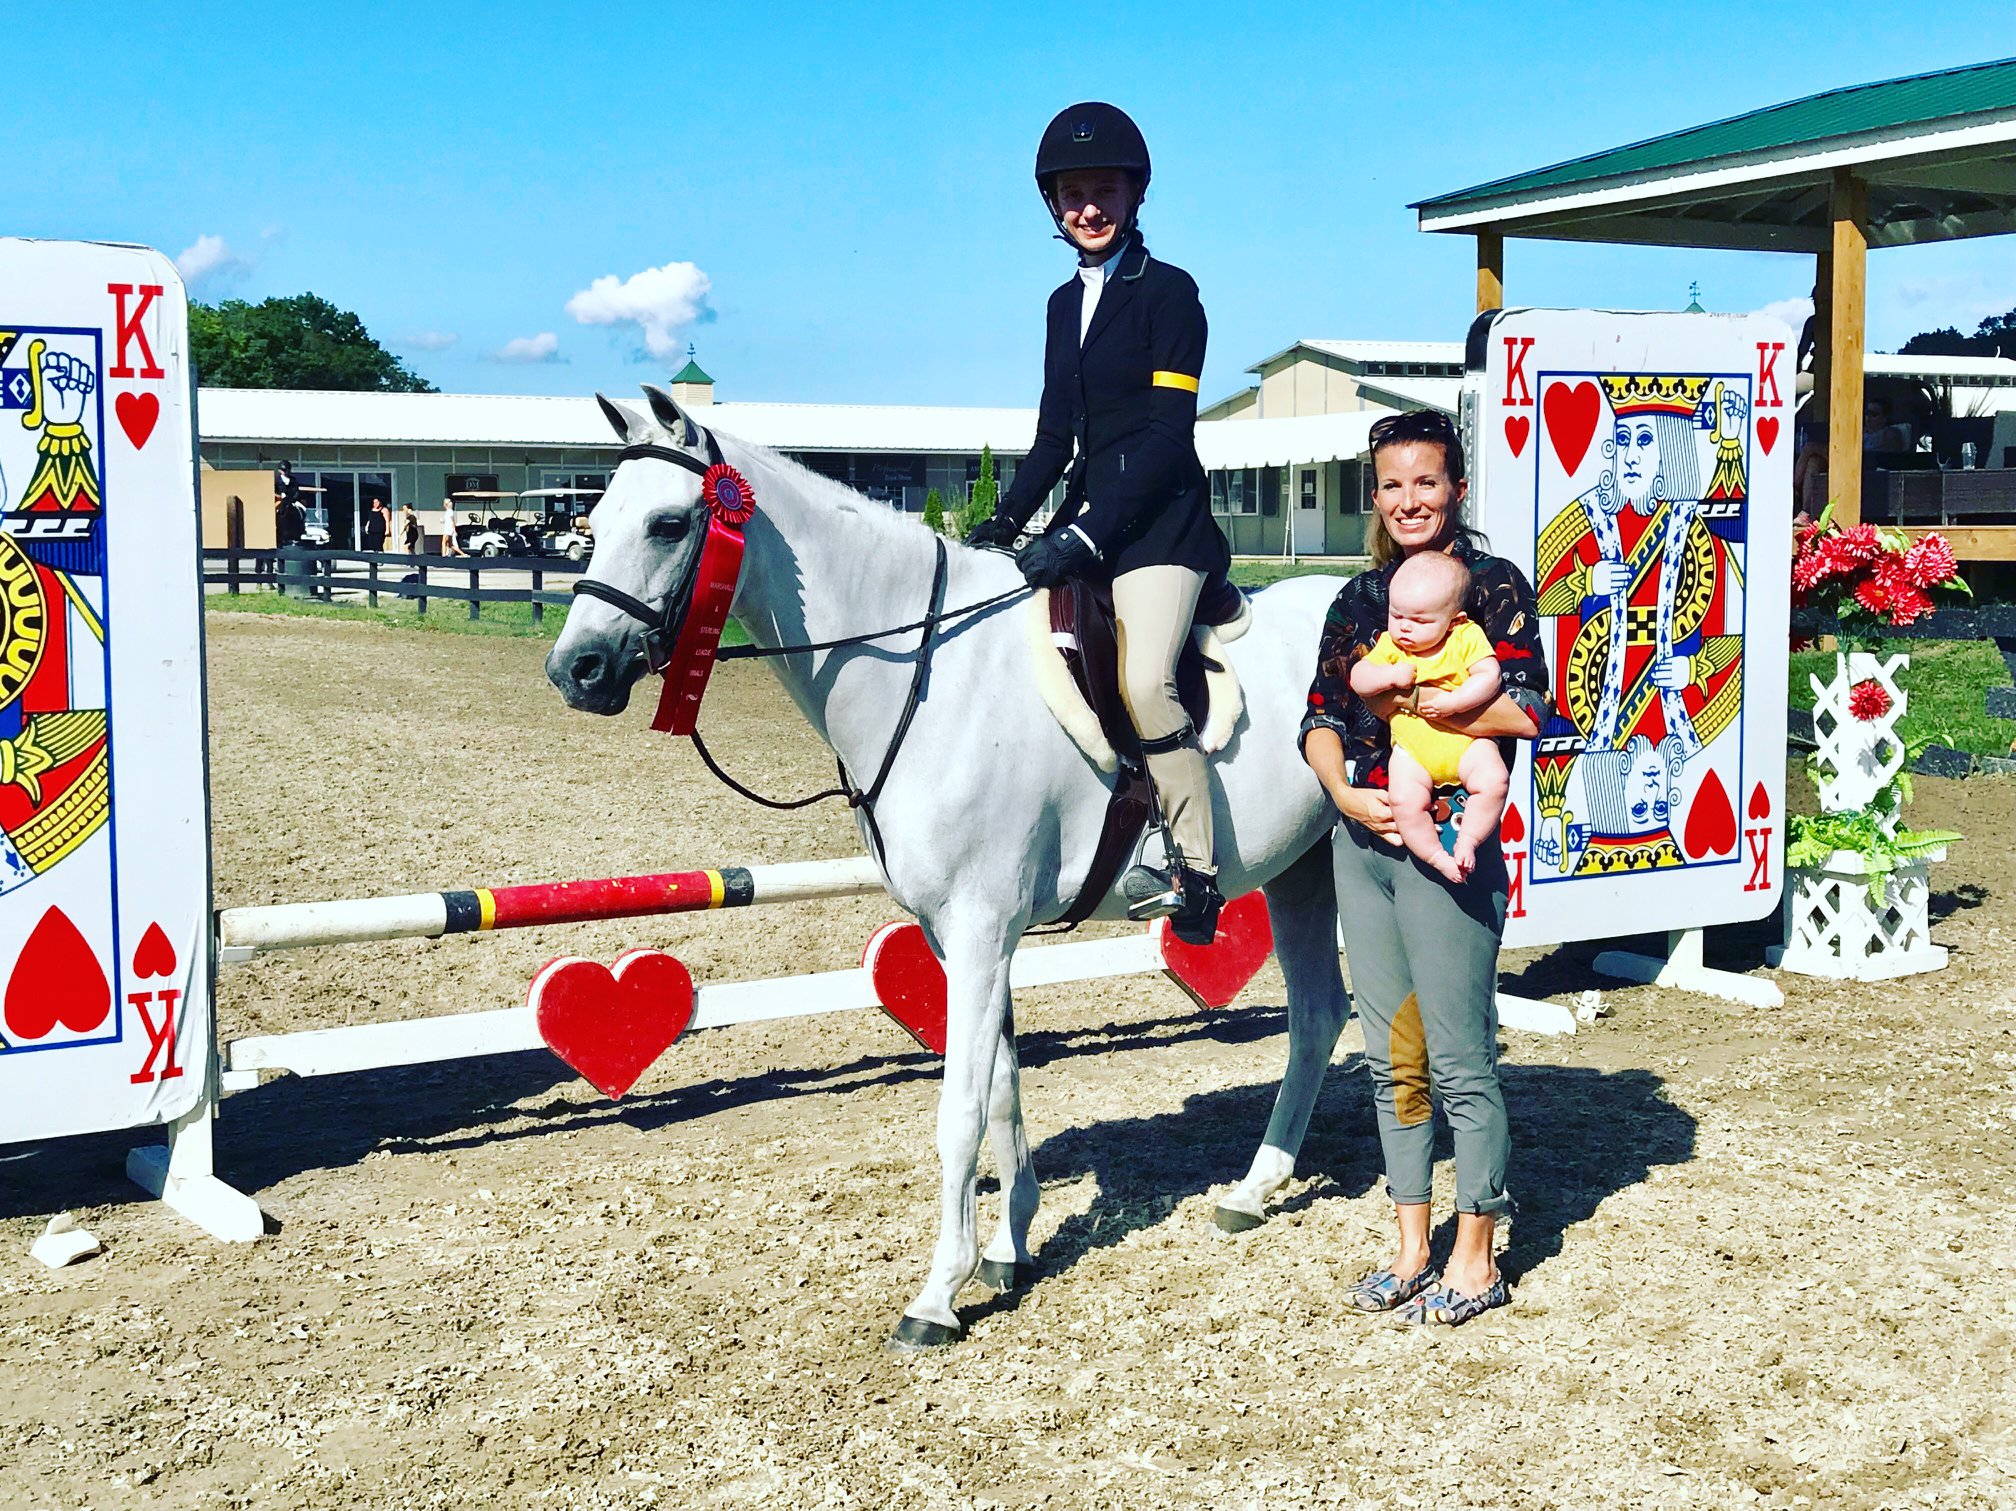 Gray pony and girl receiving awards in the show ring from a woman with a baby in her arms